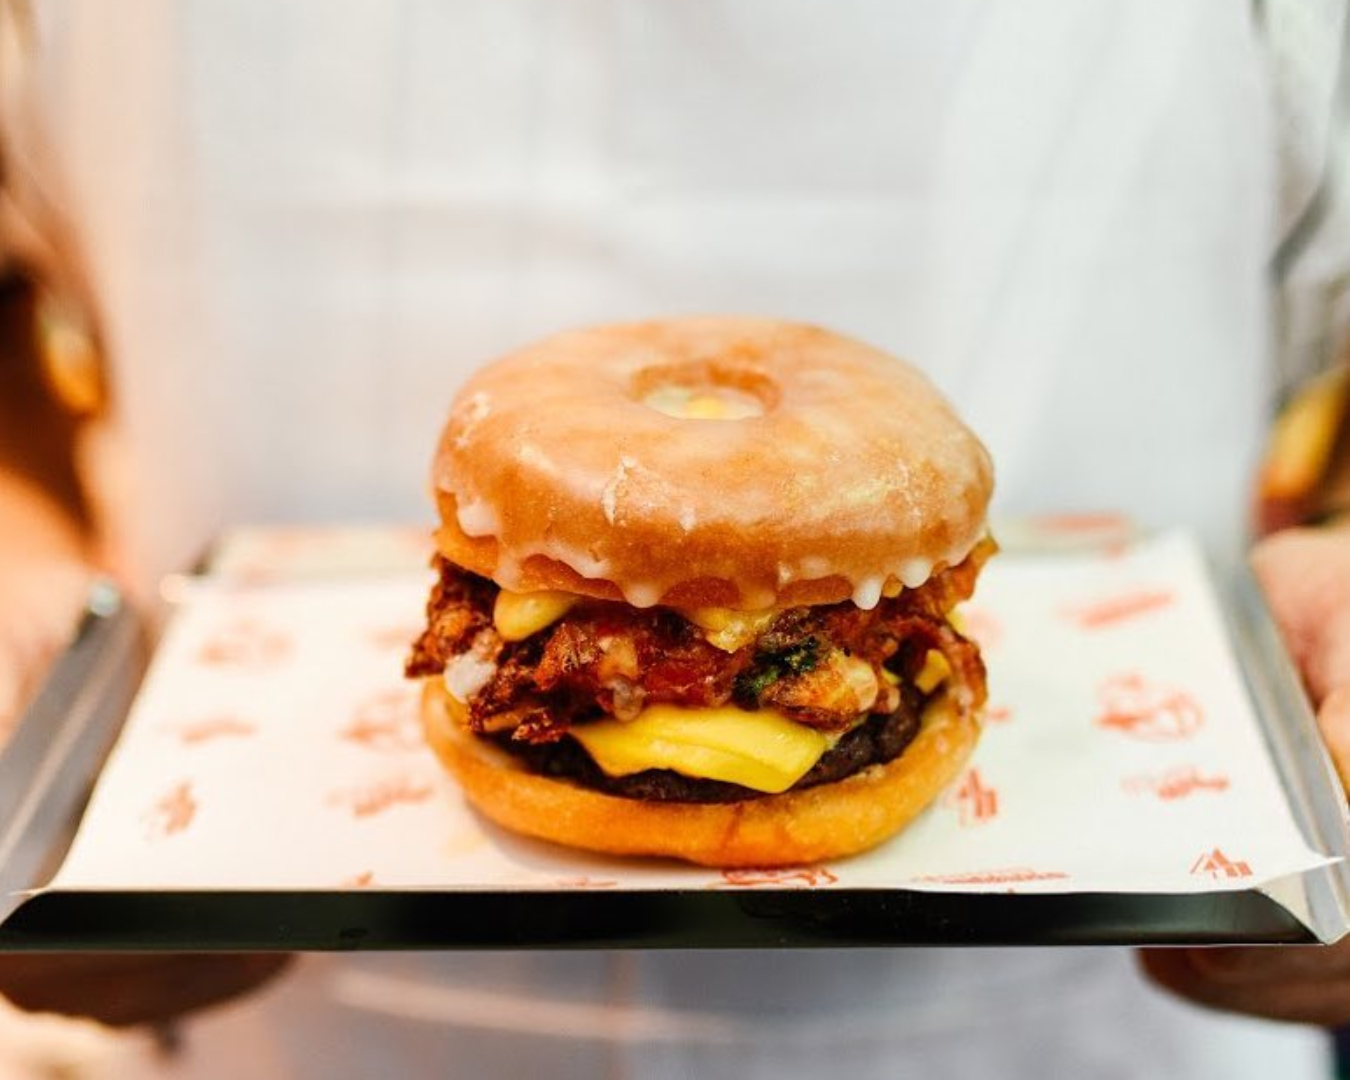 A glazed doughnut burger stuffed with a beef pattie, melted cheese and more.